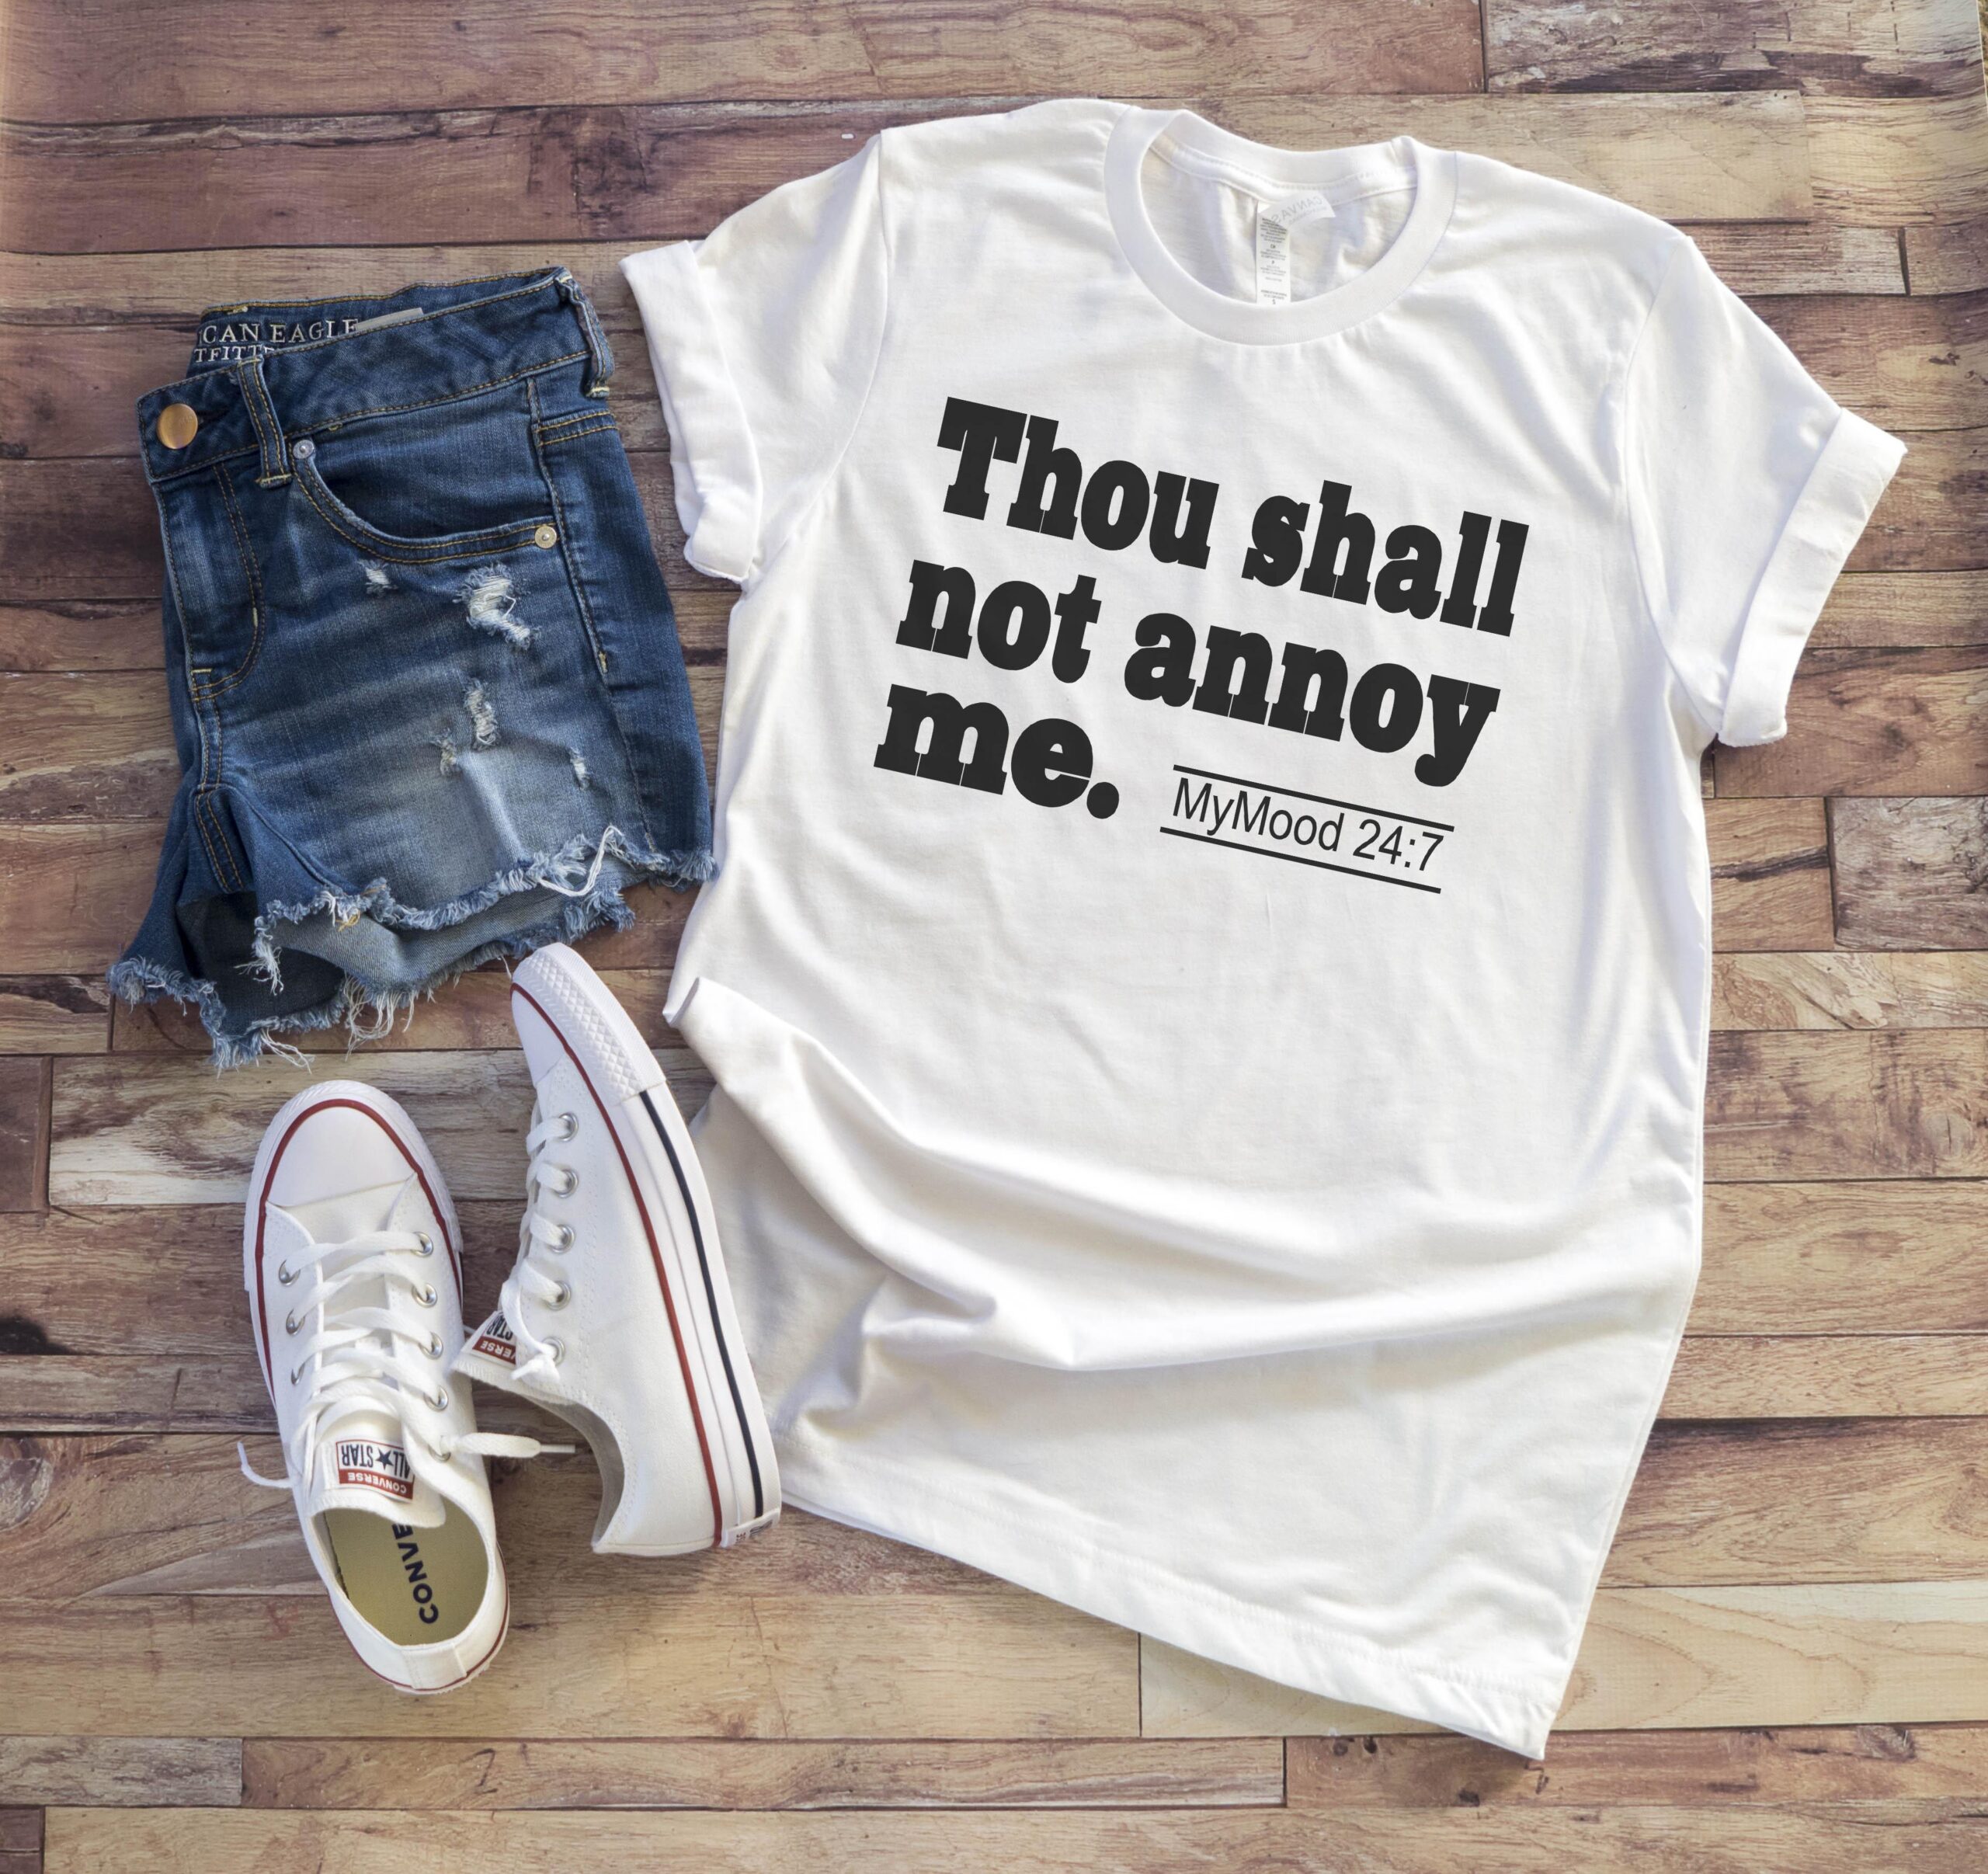 Free Thou shall not annoy me SVG File